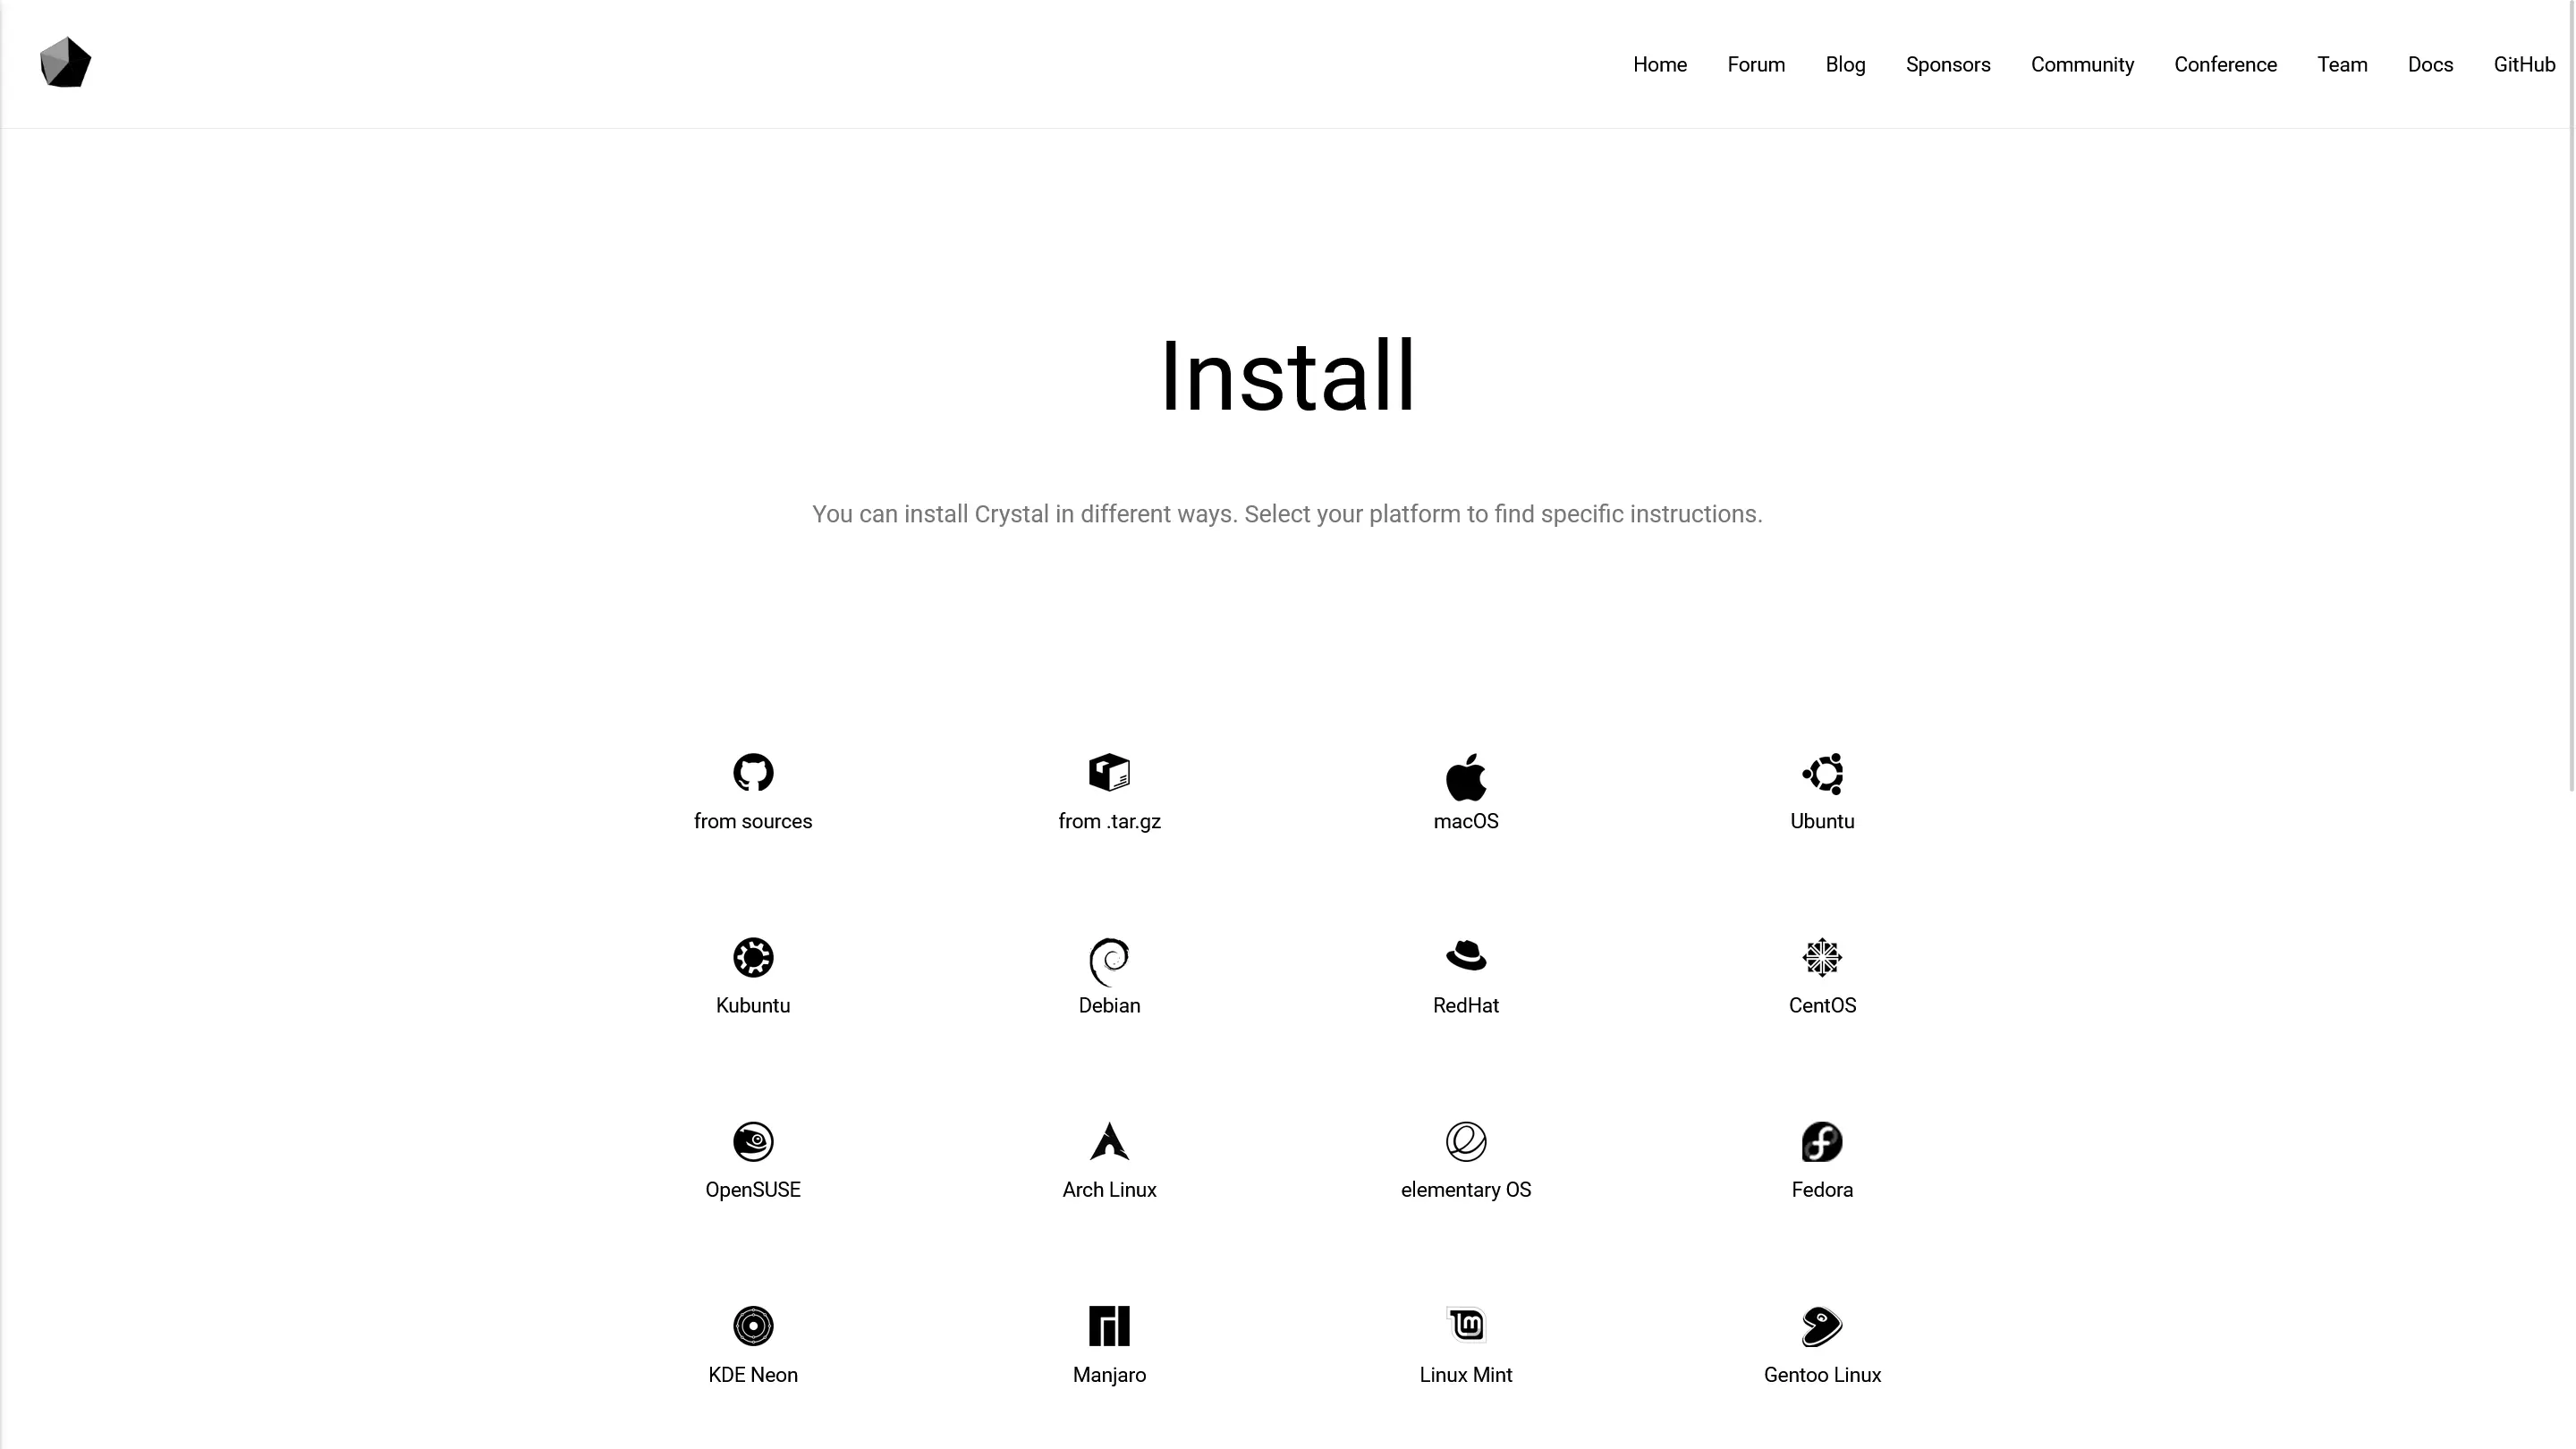 Old install page